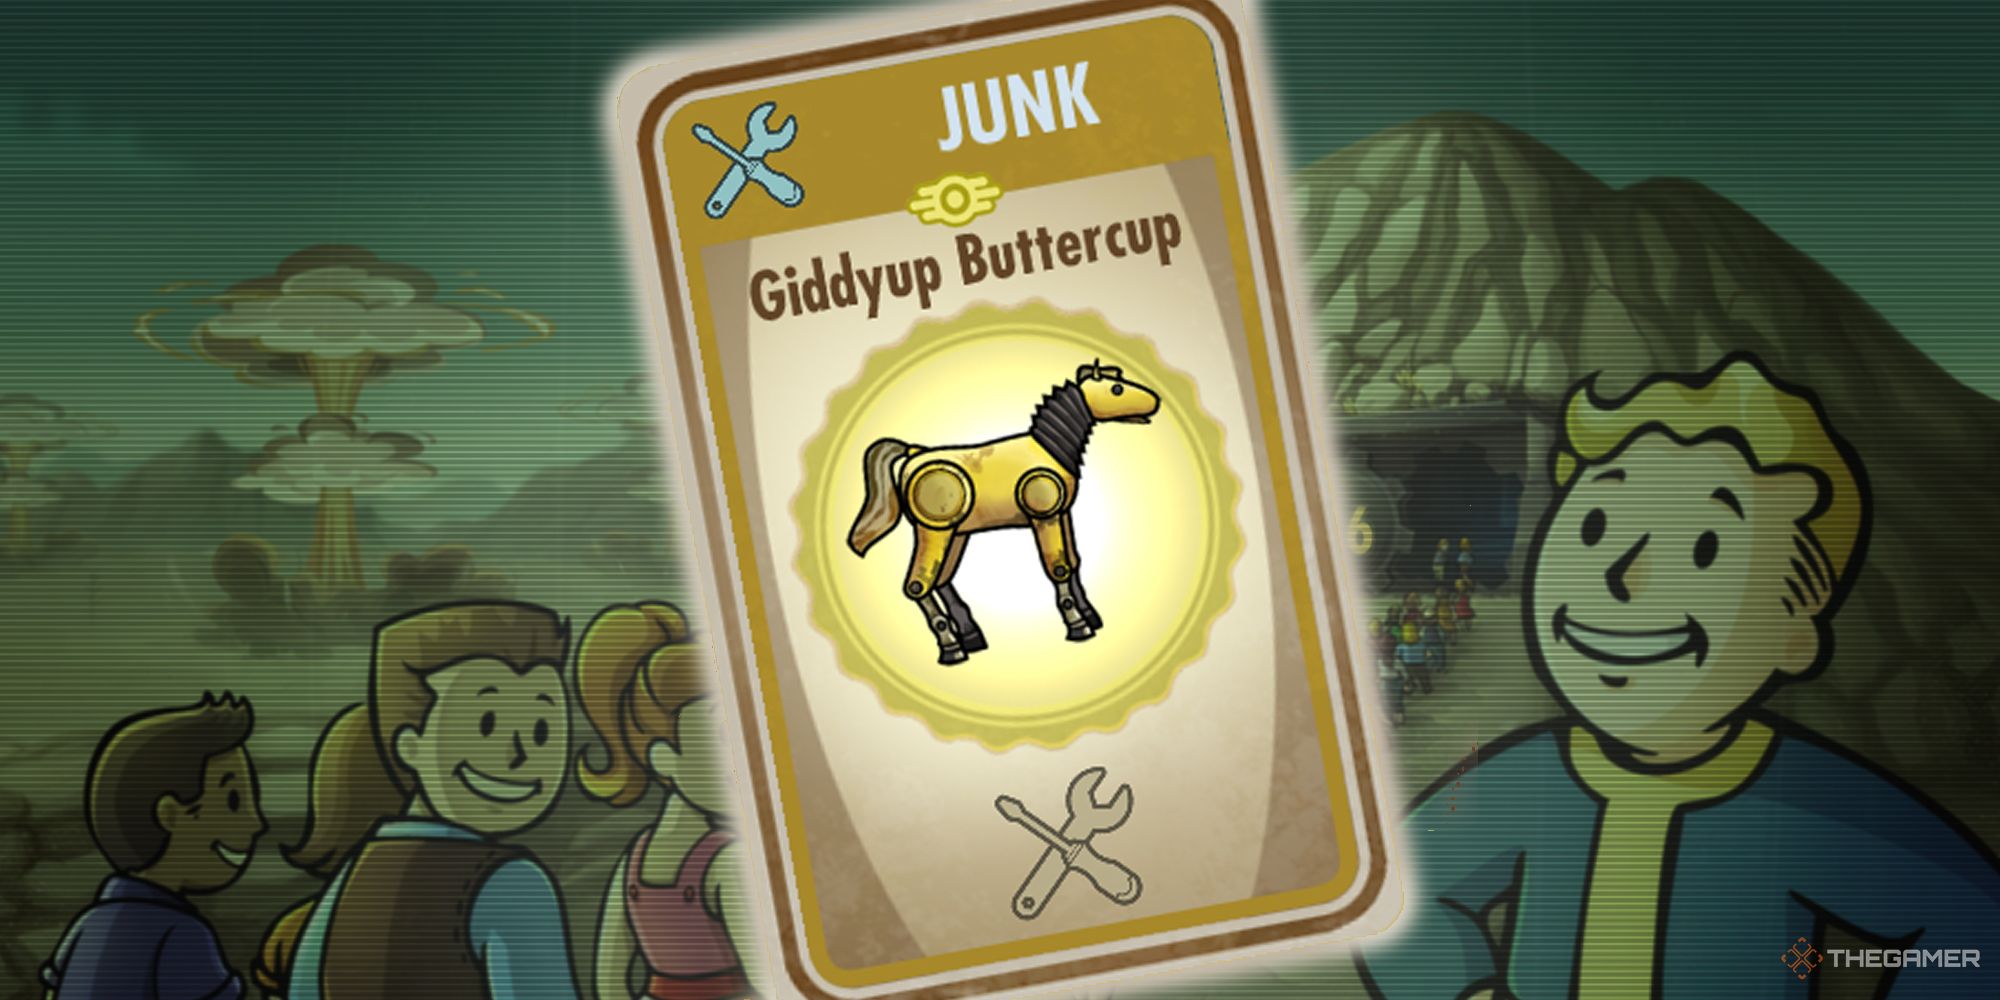 Fallout Shelter dwellers entering vault with junk card overlay